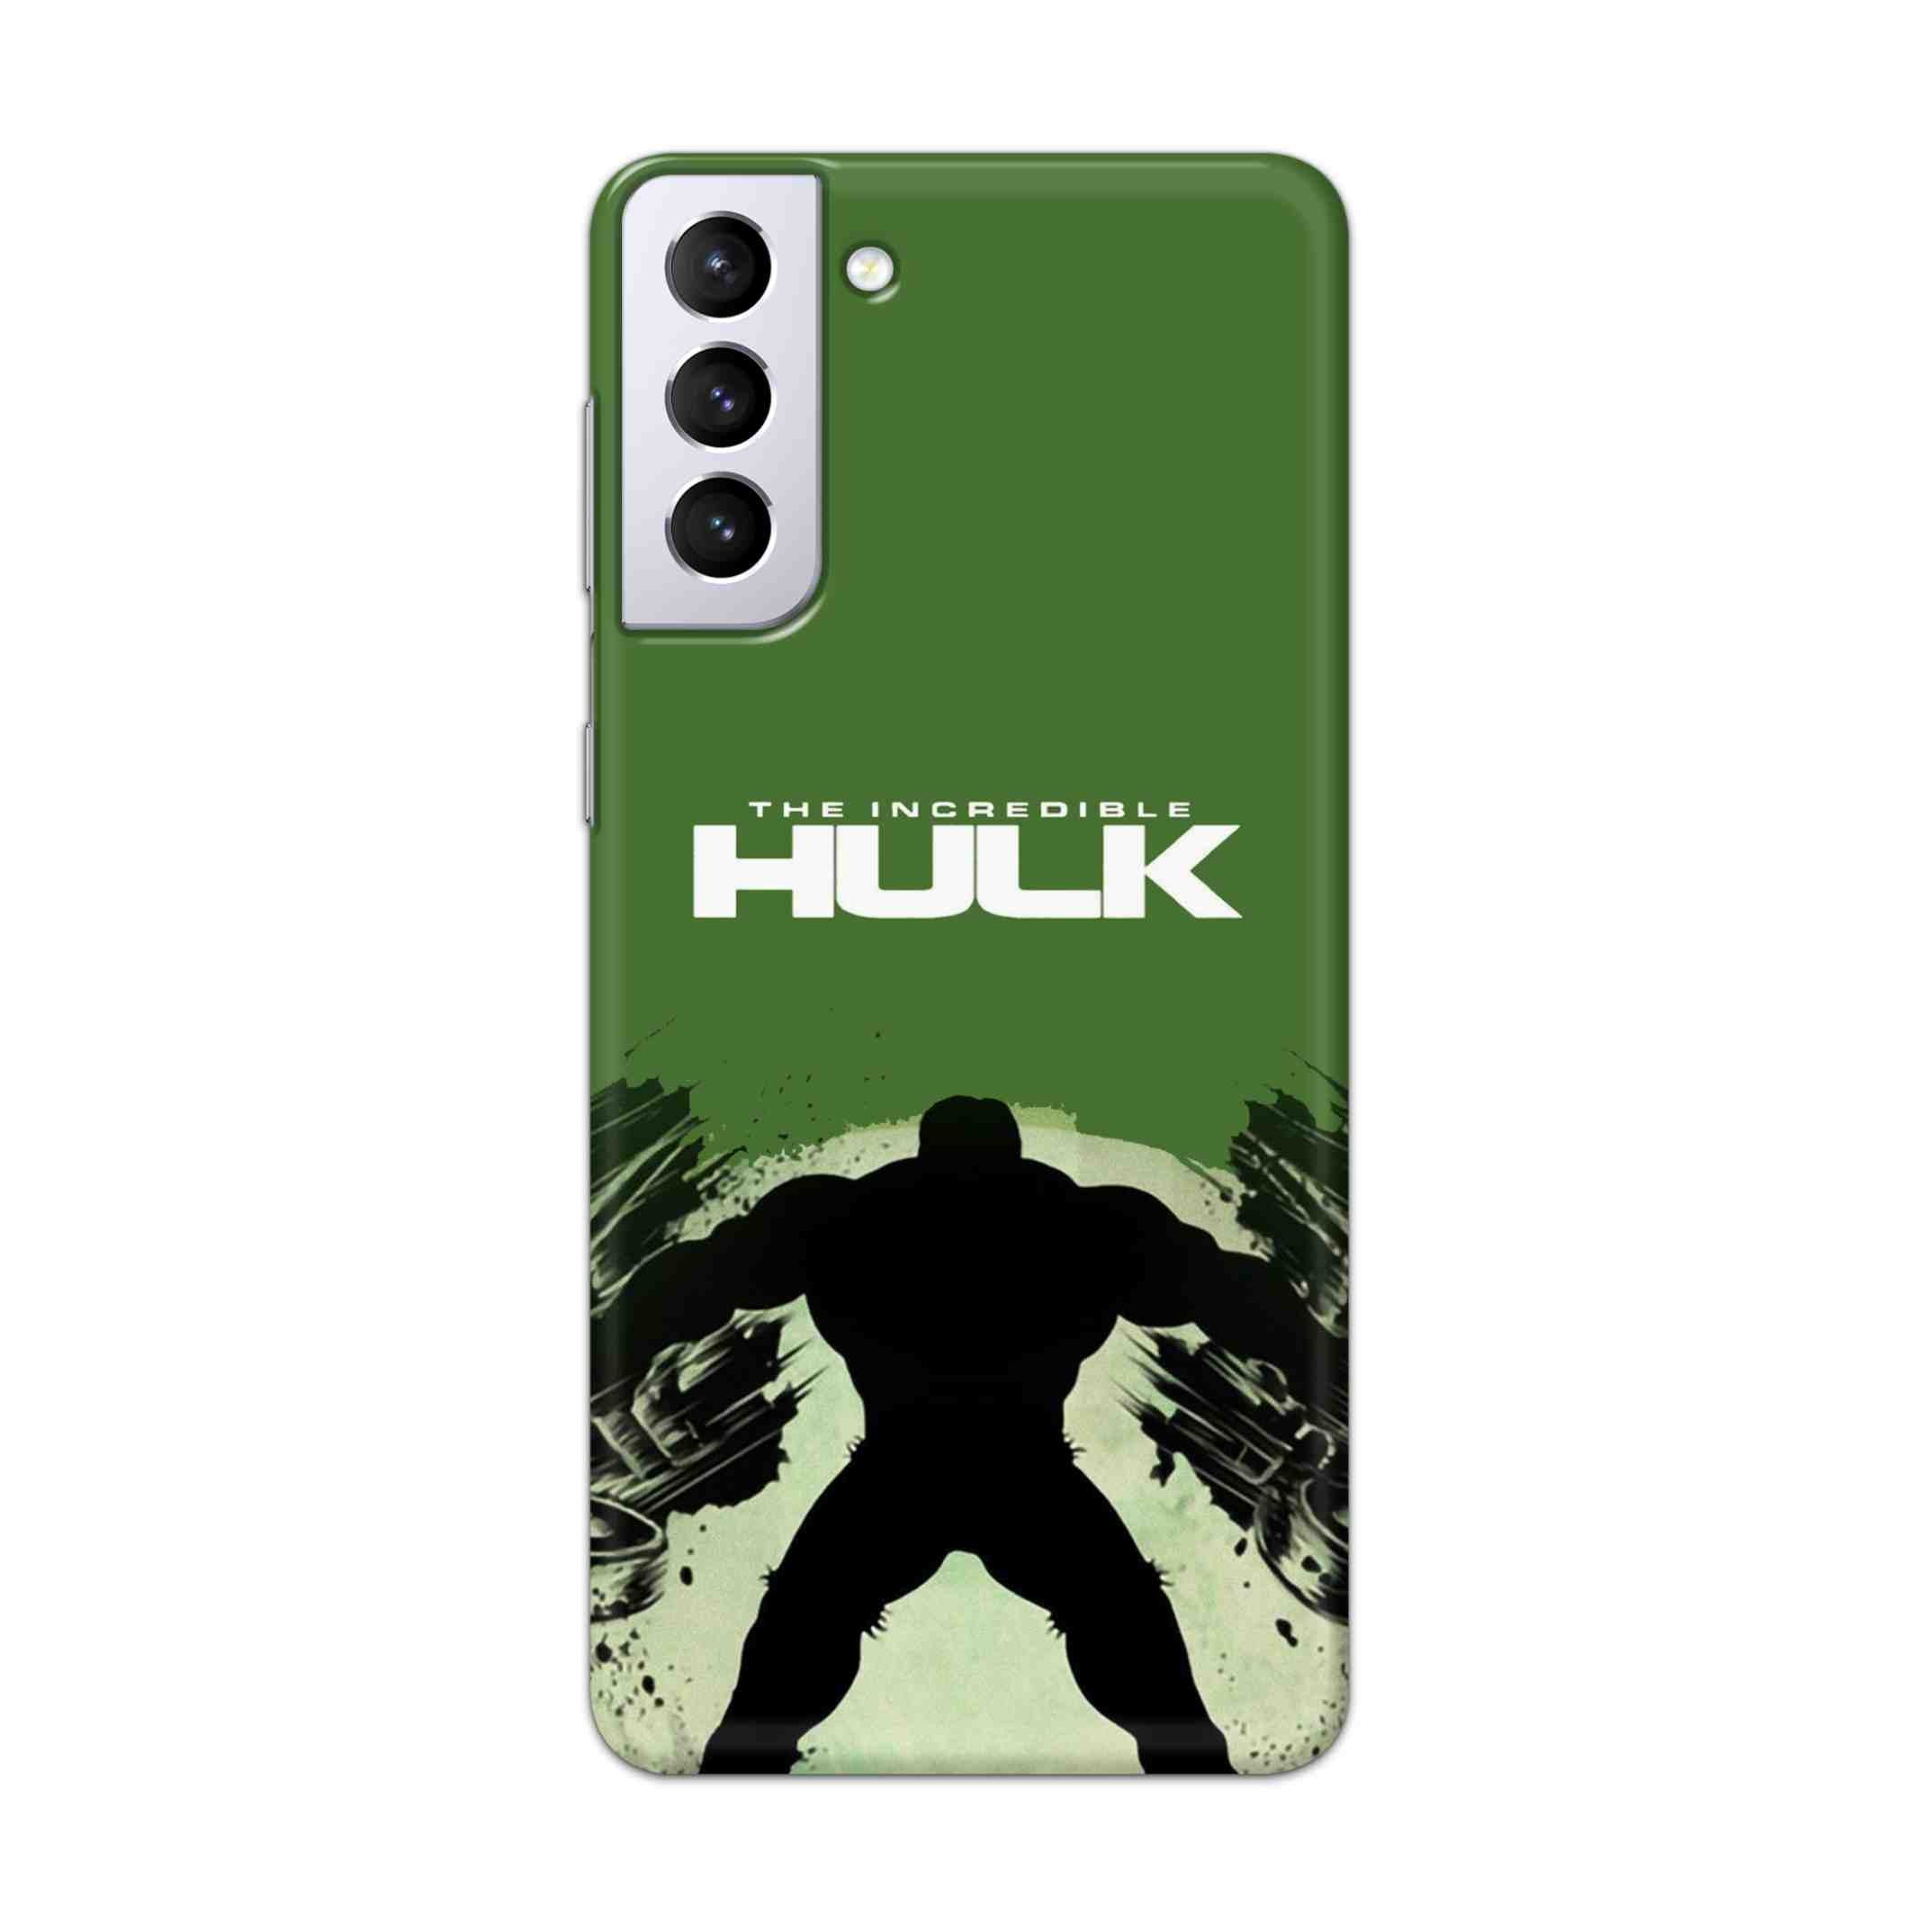 Buy Hulk Hard Back Mobile Phone Case Cover For Samsung Galaxy S21 Plus Online